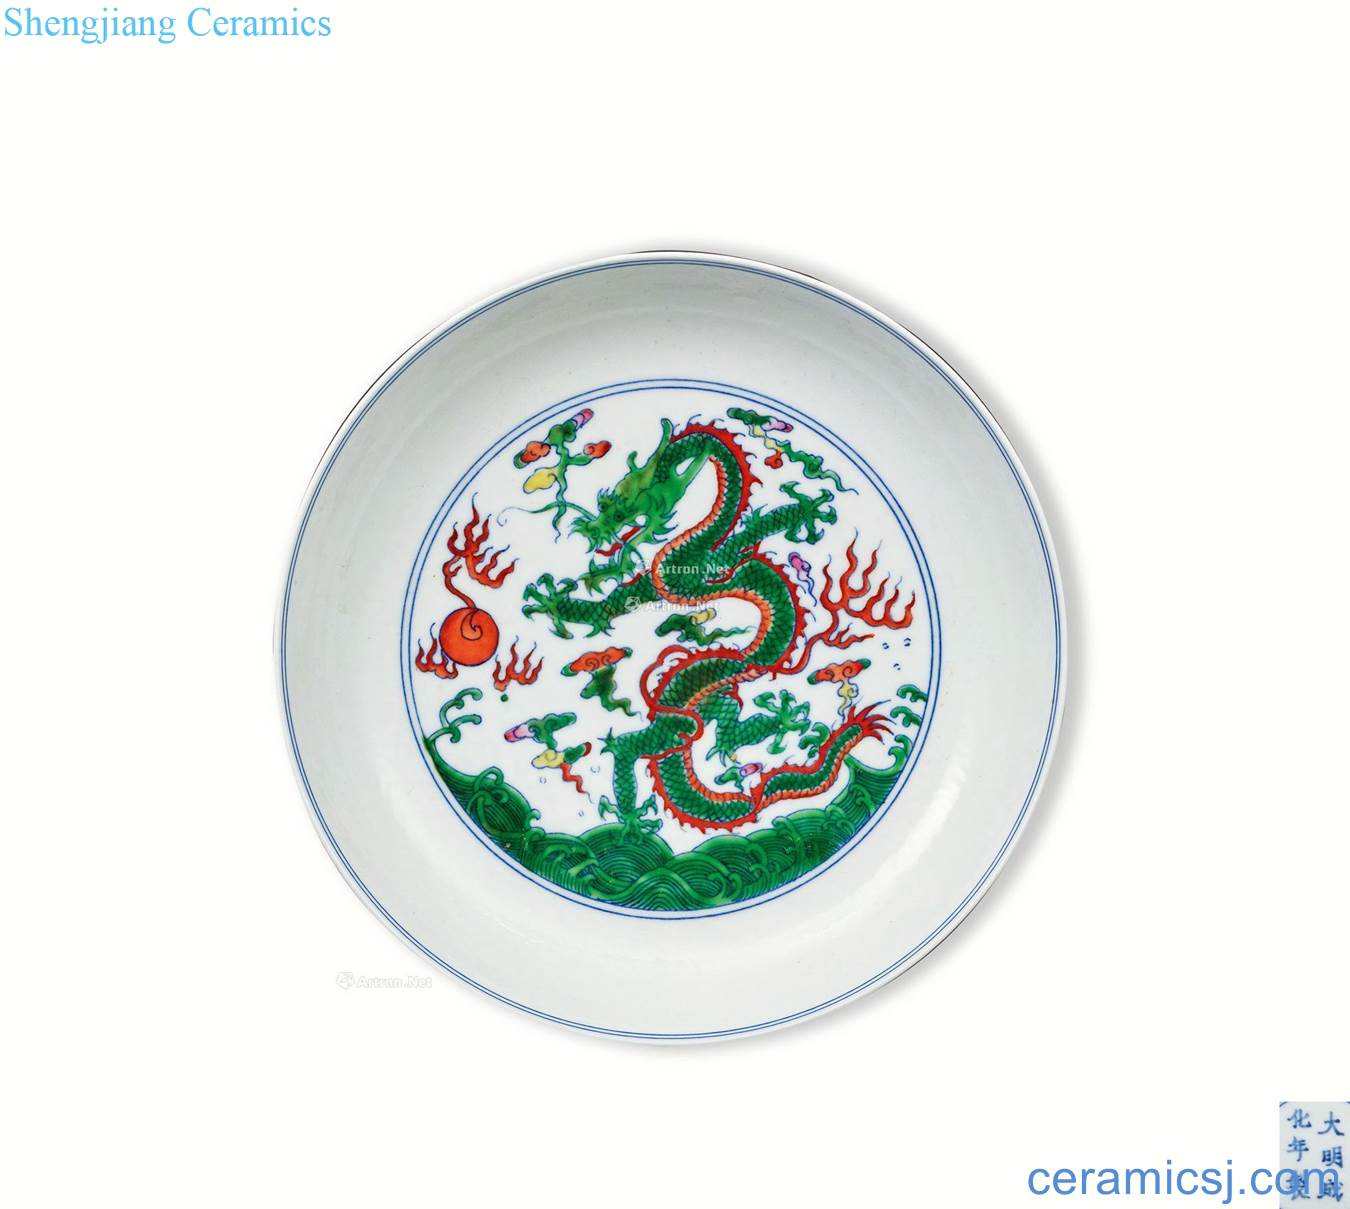 Colour the sea dragon fights in the qing dynasty